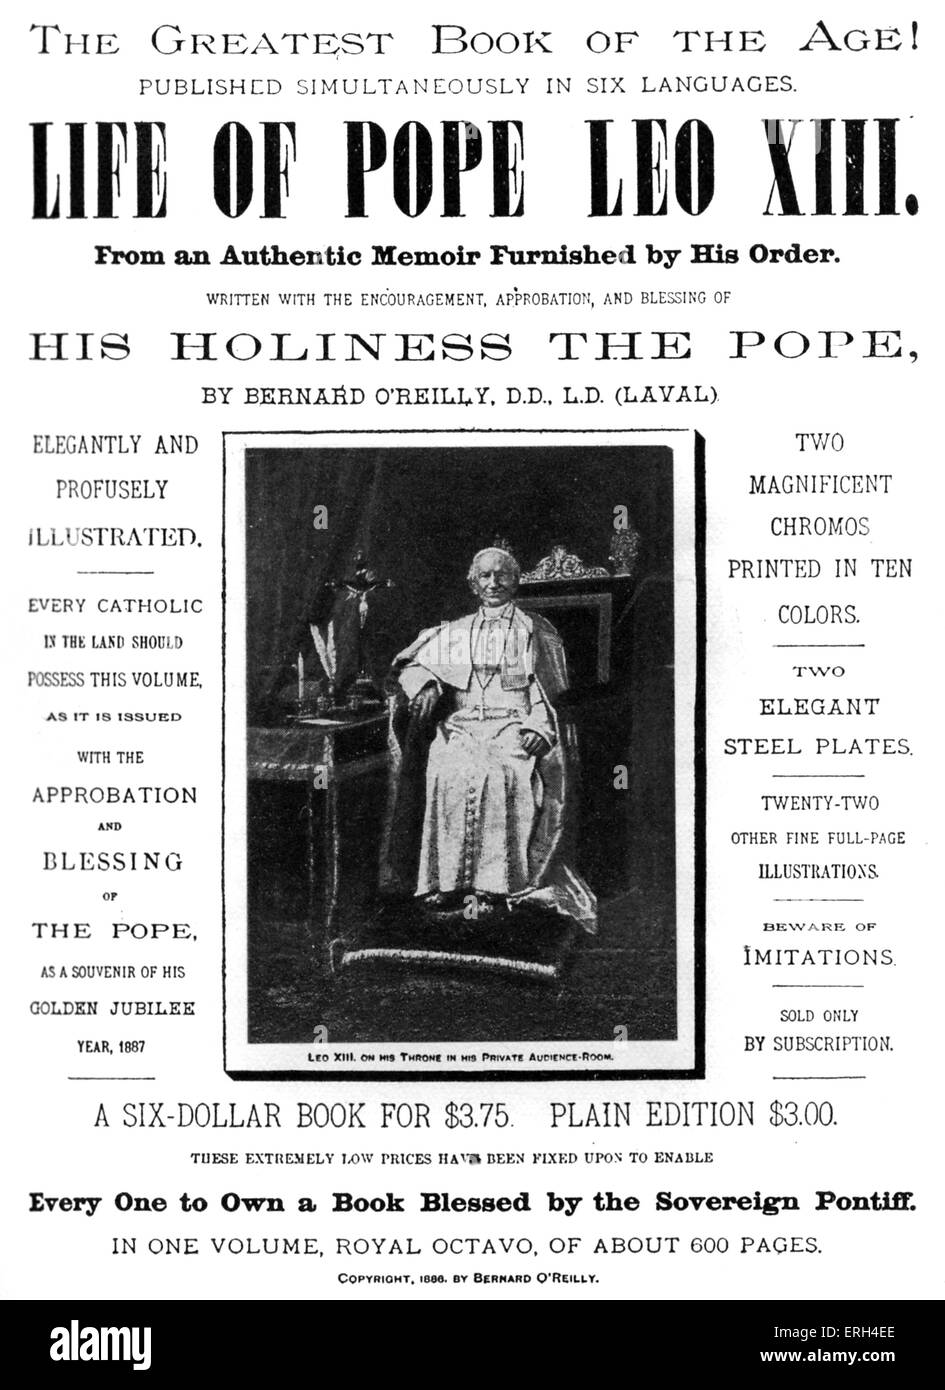 'Life of Pope Leo XIII'-poster promoting the book. Book published in six languages by Mark Twain 's and Charles L. Webster 's Stock Photo